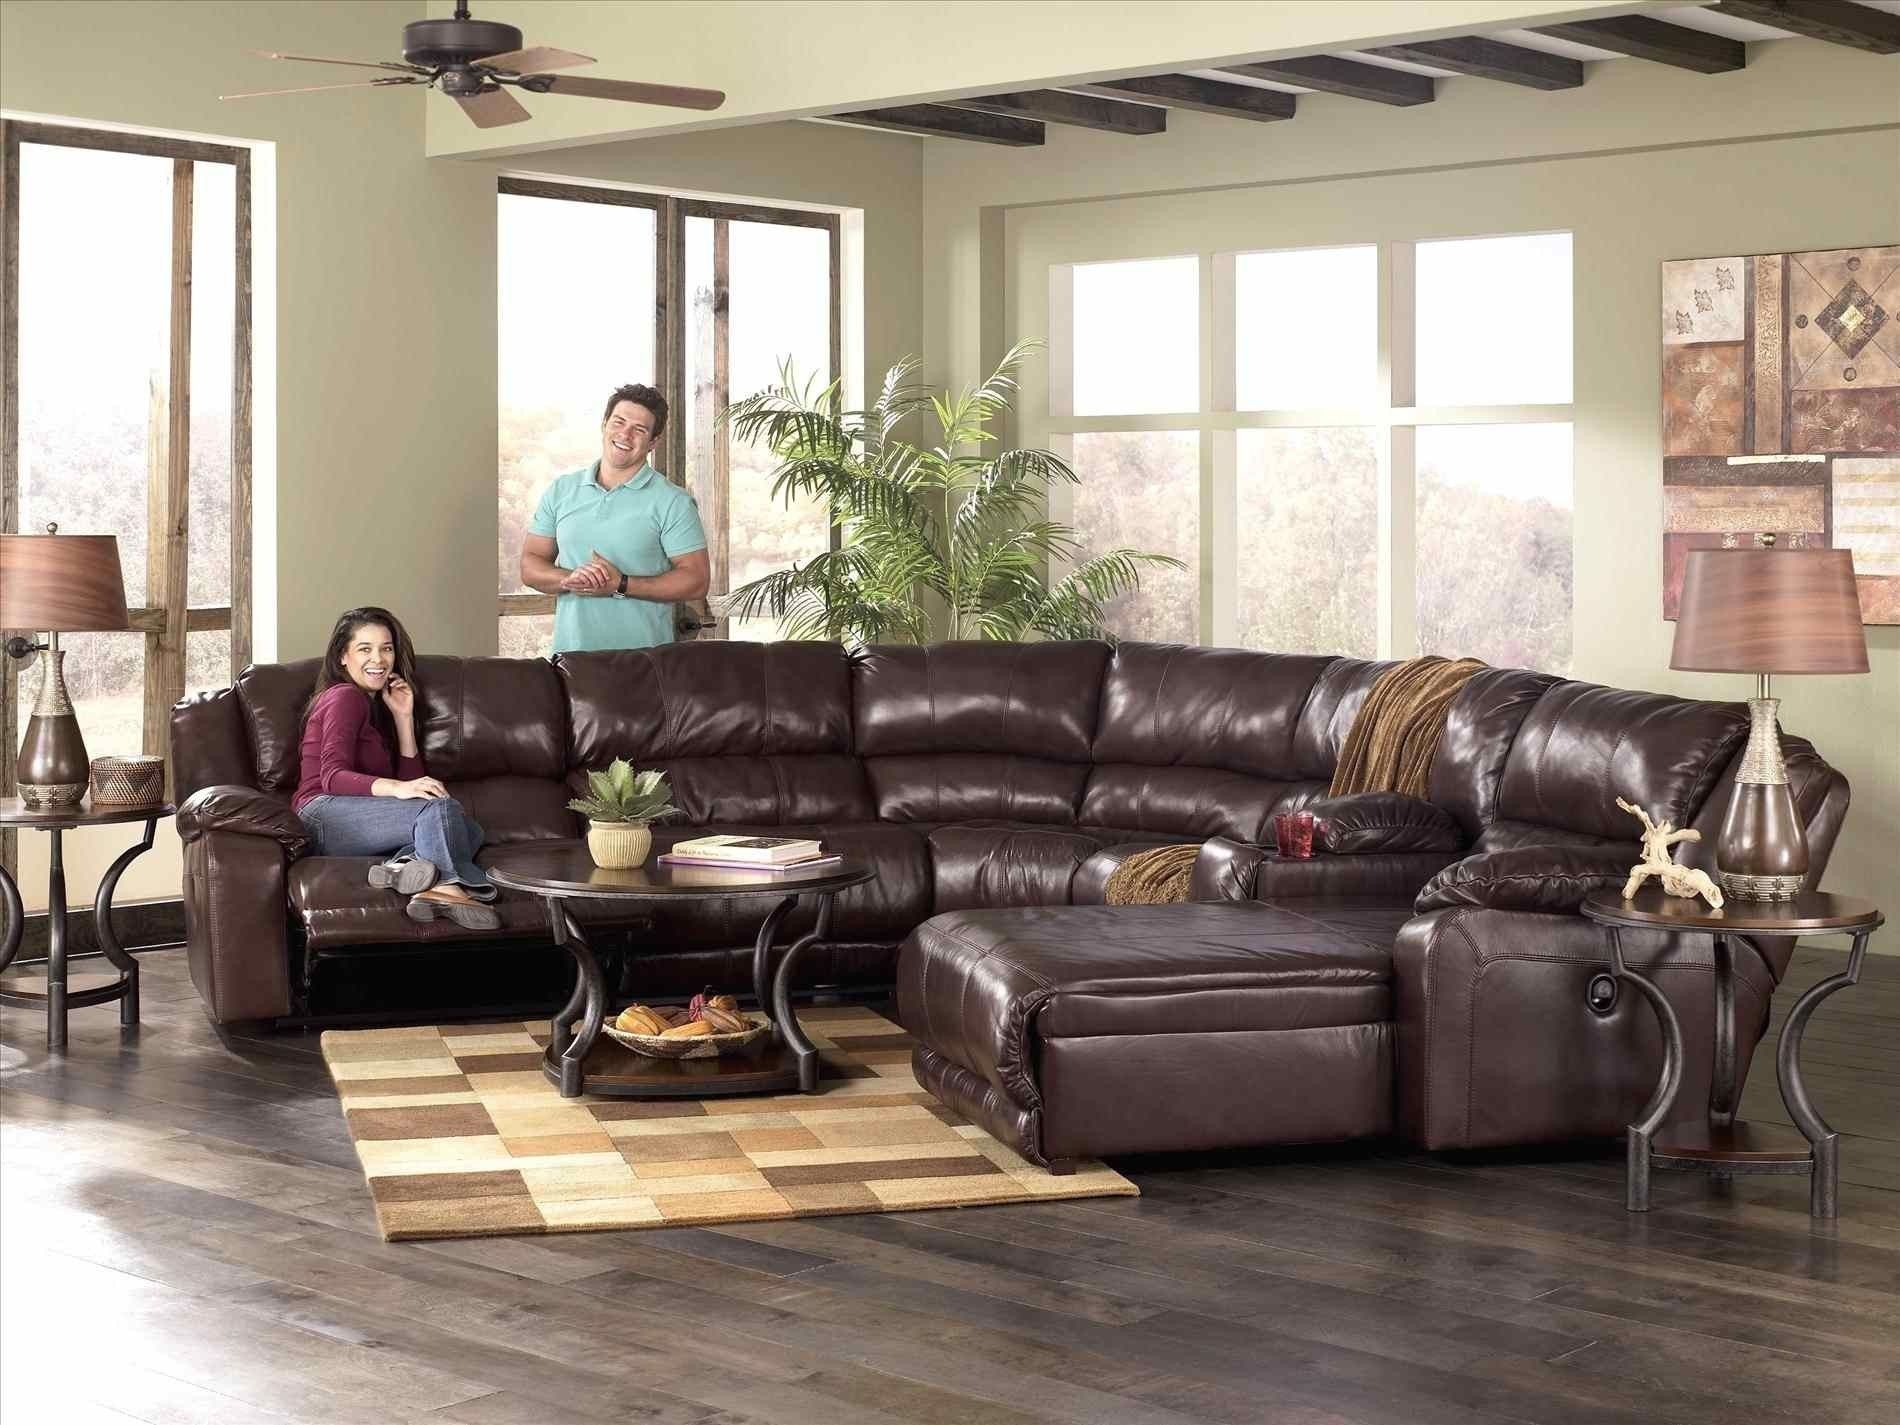 Ashleys Furniture Lubbock Throughout Lubbock Sectional Sofas (View 8 of 10)